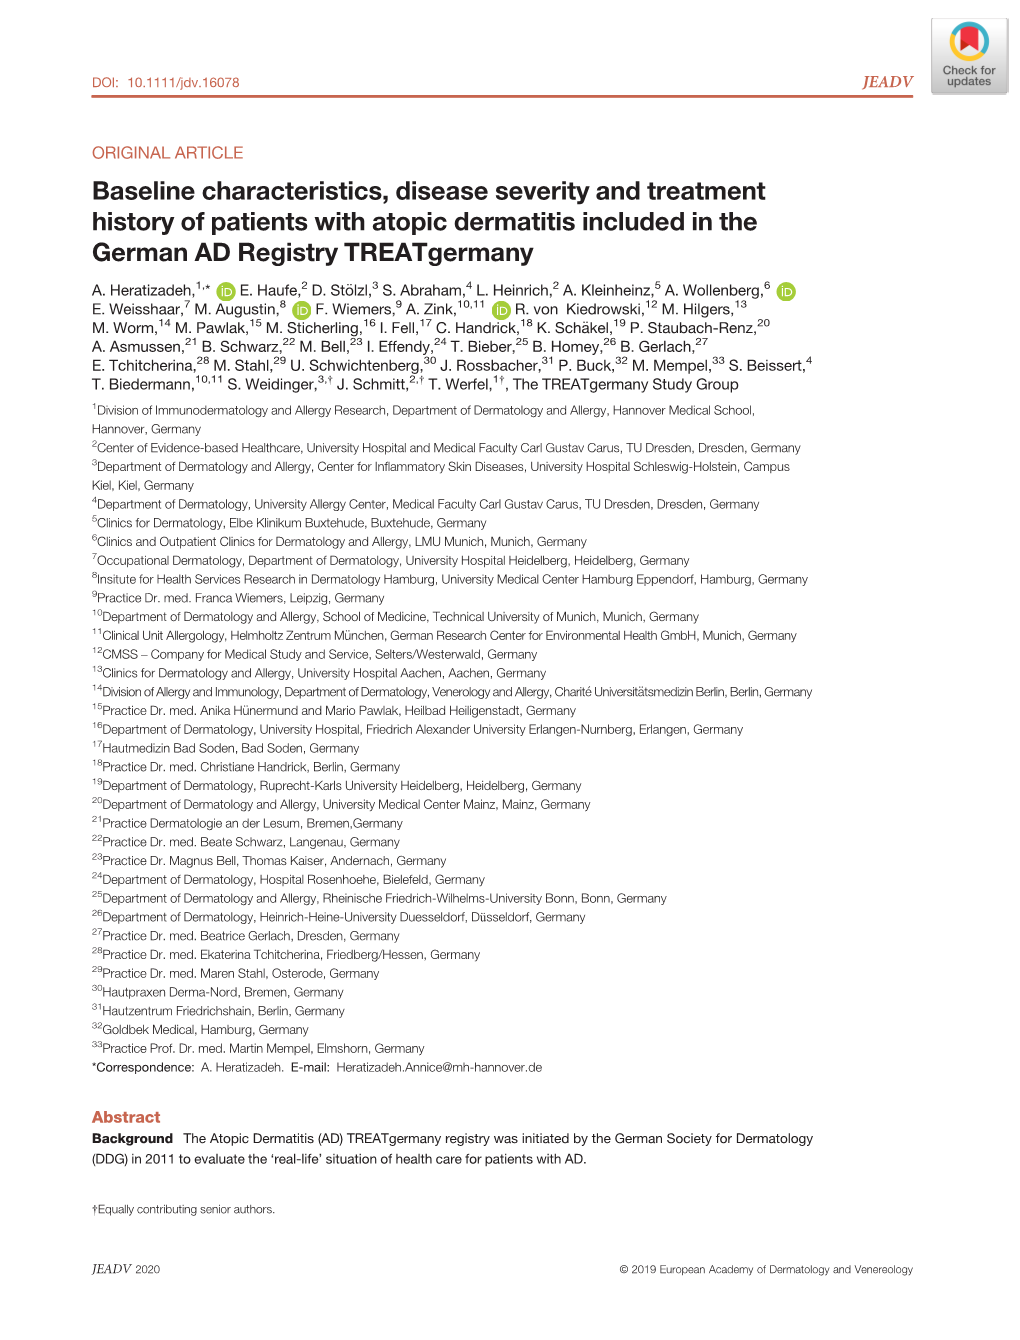 Baseline Characteristics, Disease Severity and Treatment History of Patients with Atopic Dermatitis Included in the German AD Registry Treatgermany